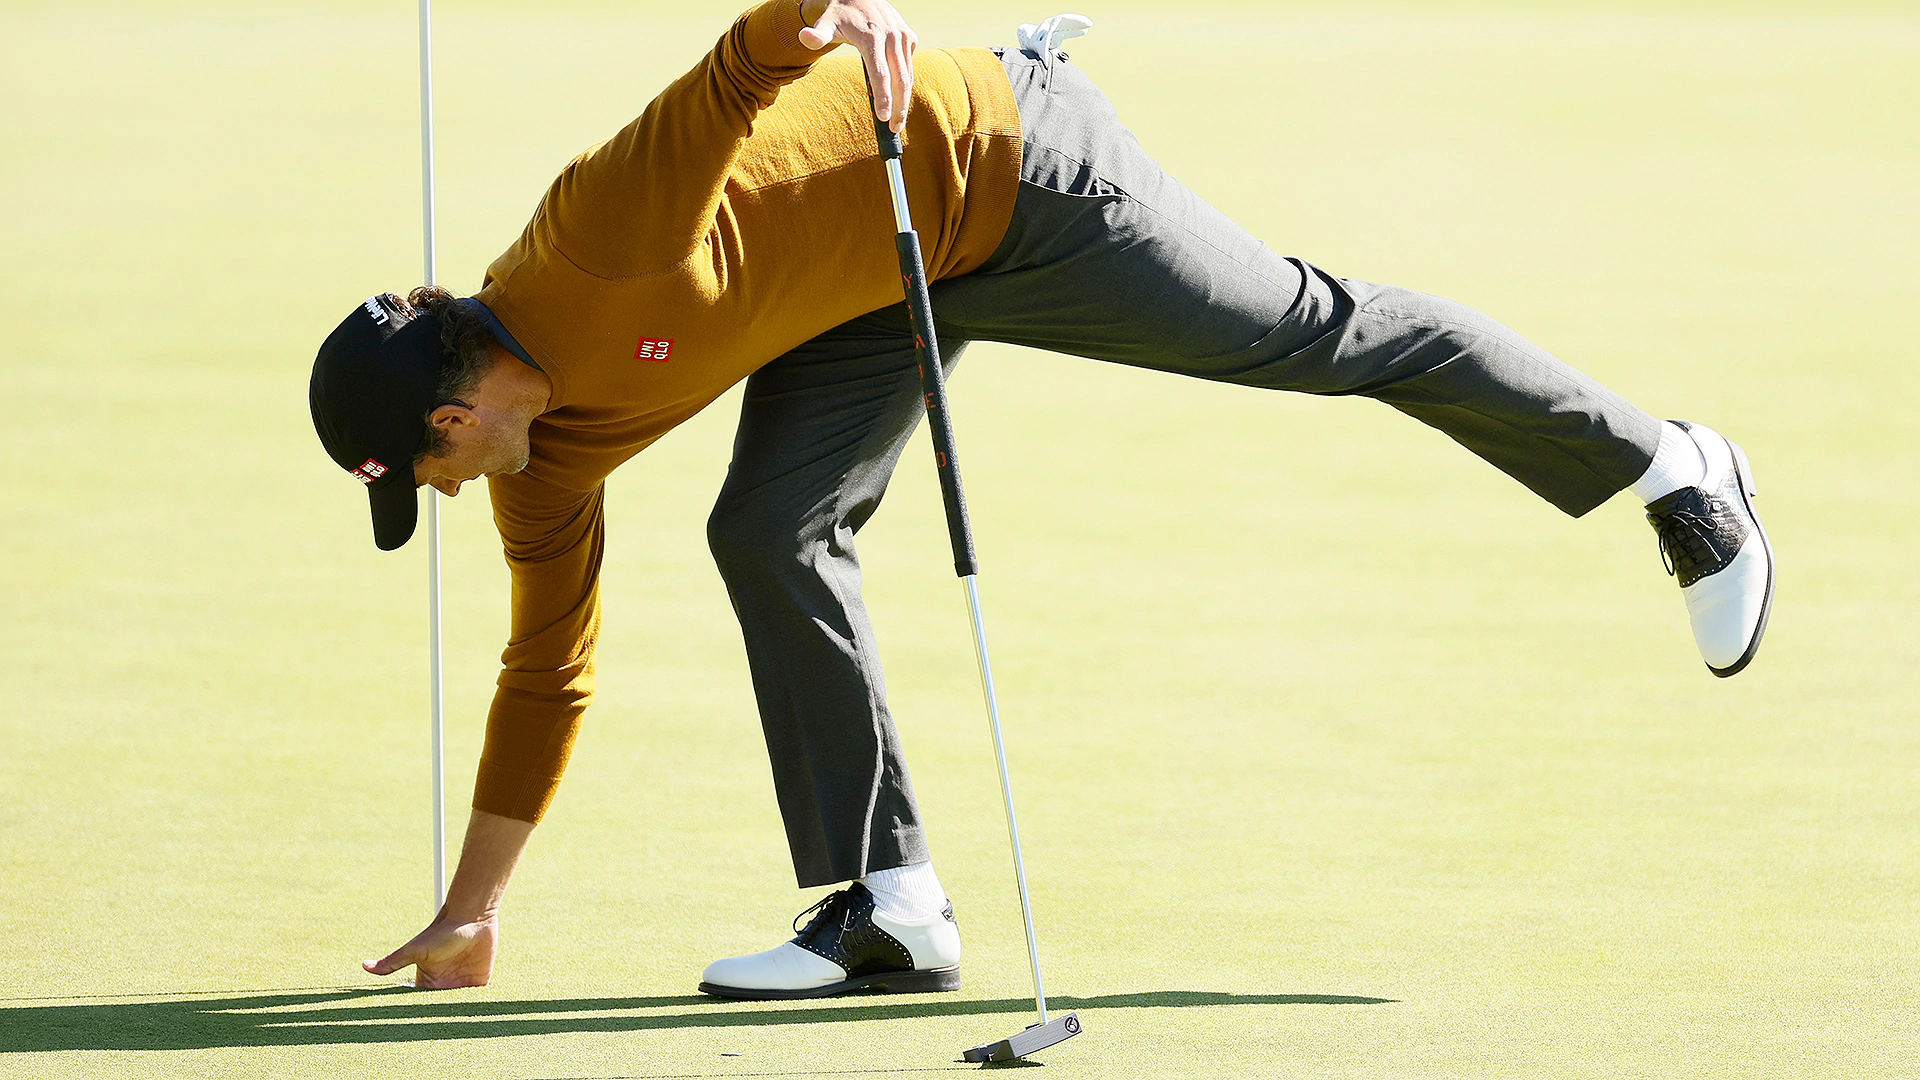 Adam Scott adds new putter to be ‘entertained’ and it works in Round 1